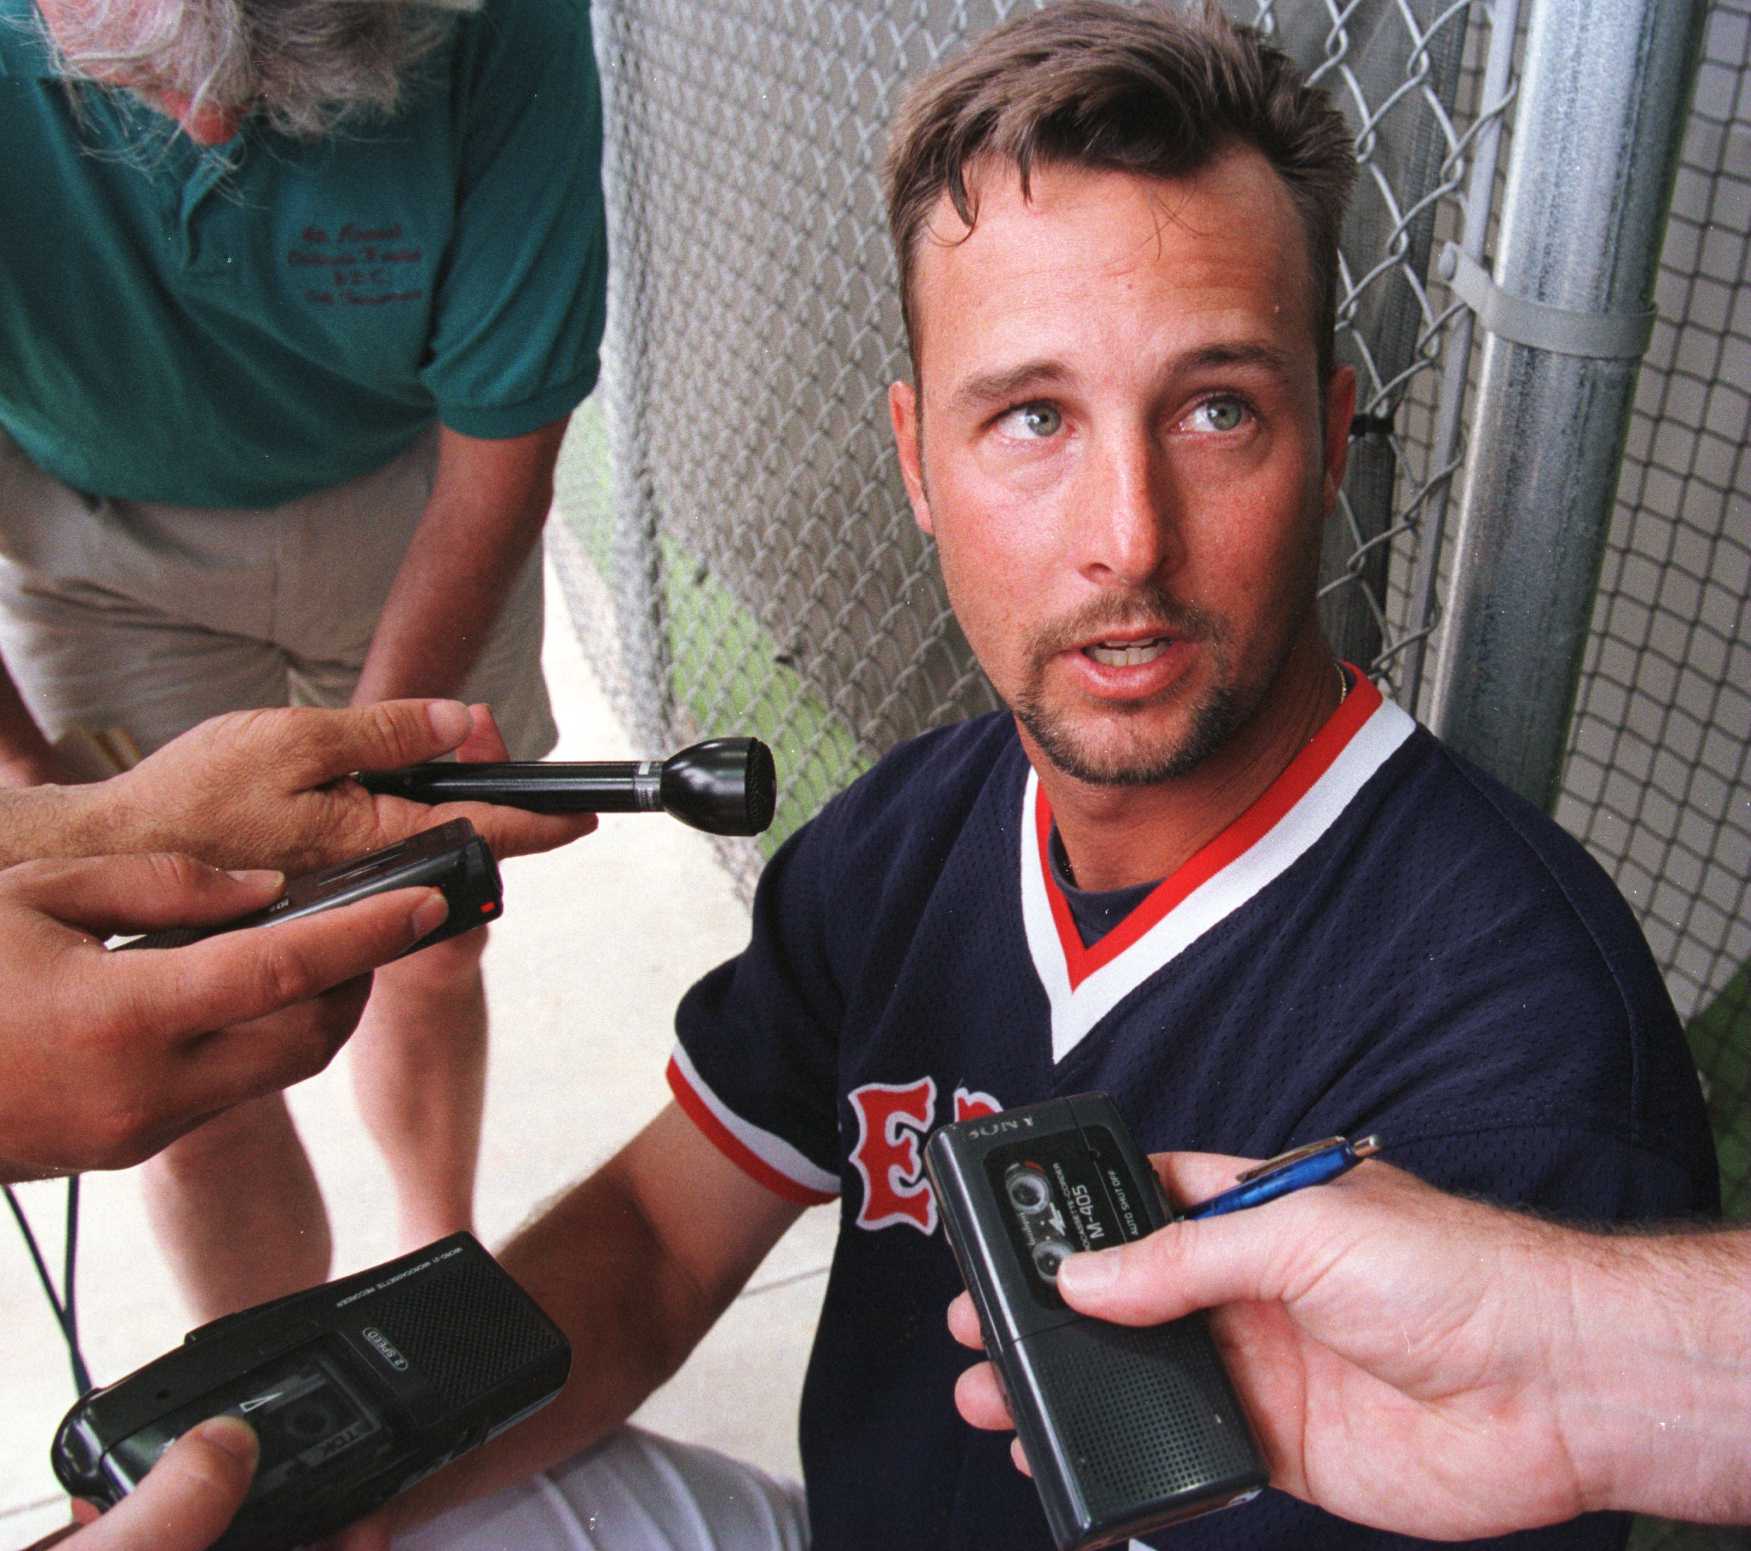 Tim Wakefield answering questions during a press conference in Ft. Myers, Florida on March 1, 1996 | Source: Getty Images